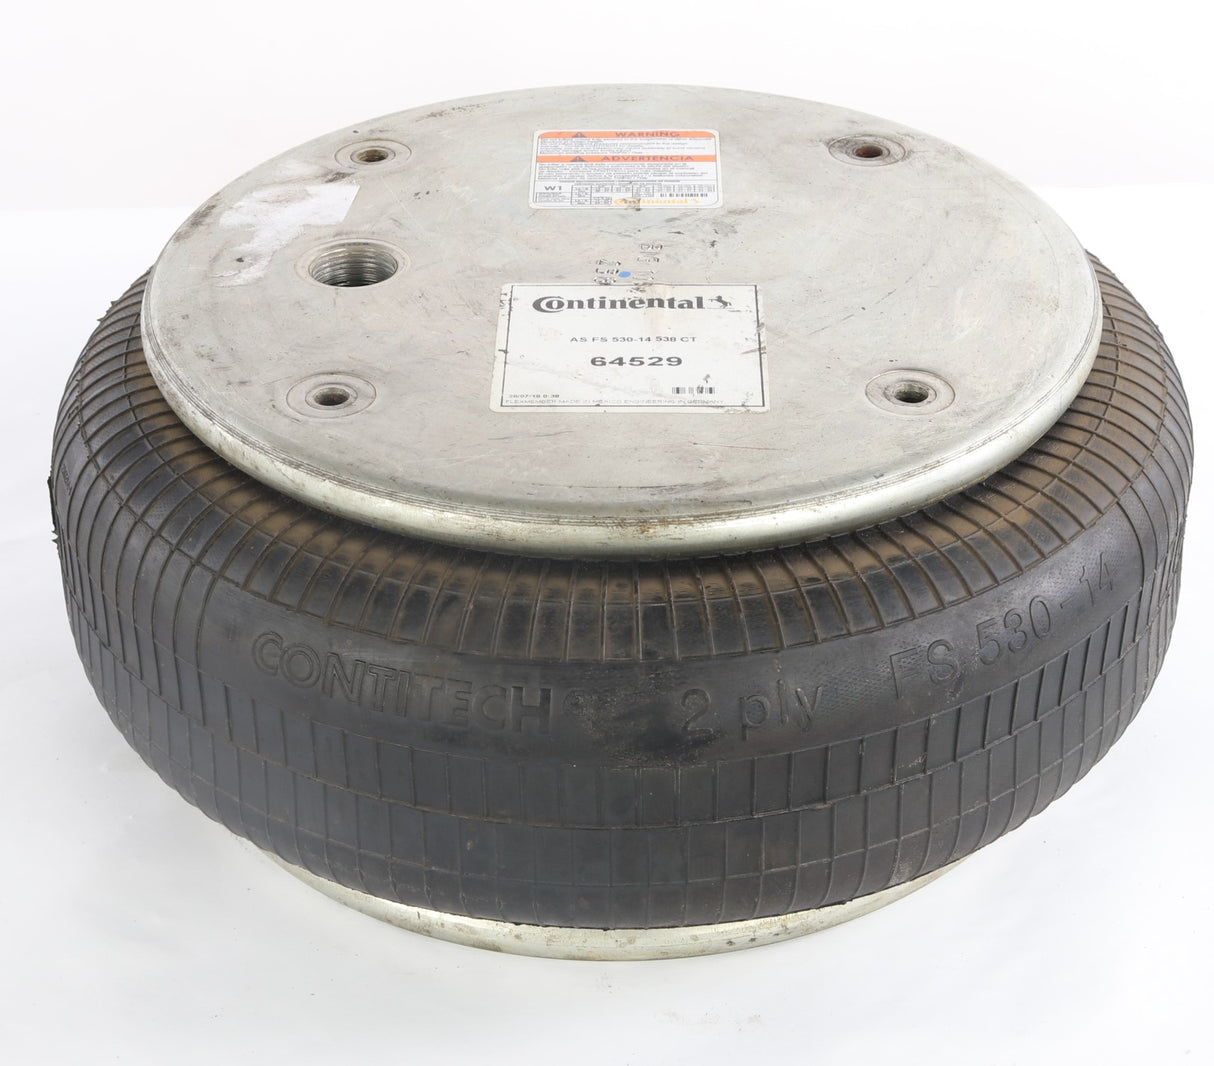 CONTINENTAL AG - CONTITECH/ELITE/GOODYEAR/ROULUNDS ­-­ 64529 ­-­ AIR SPRING FS 530-14 538